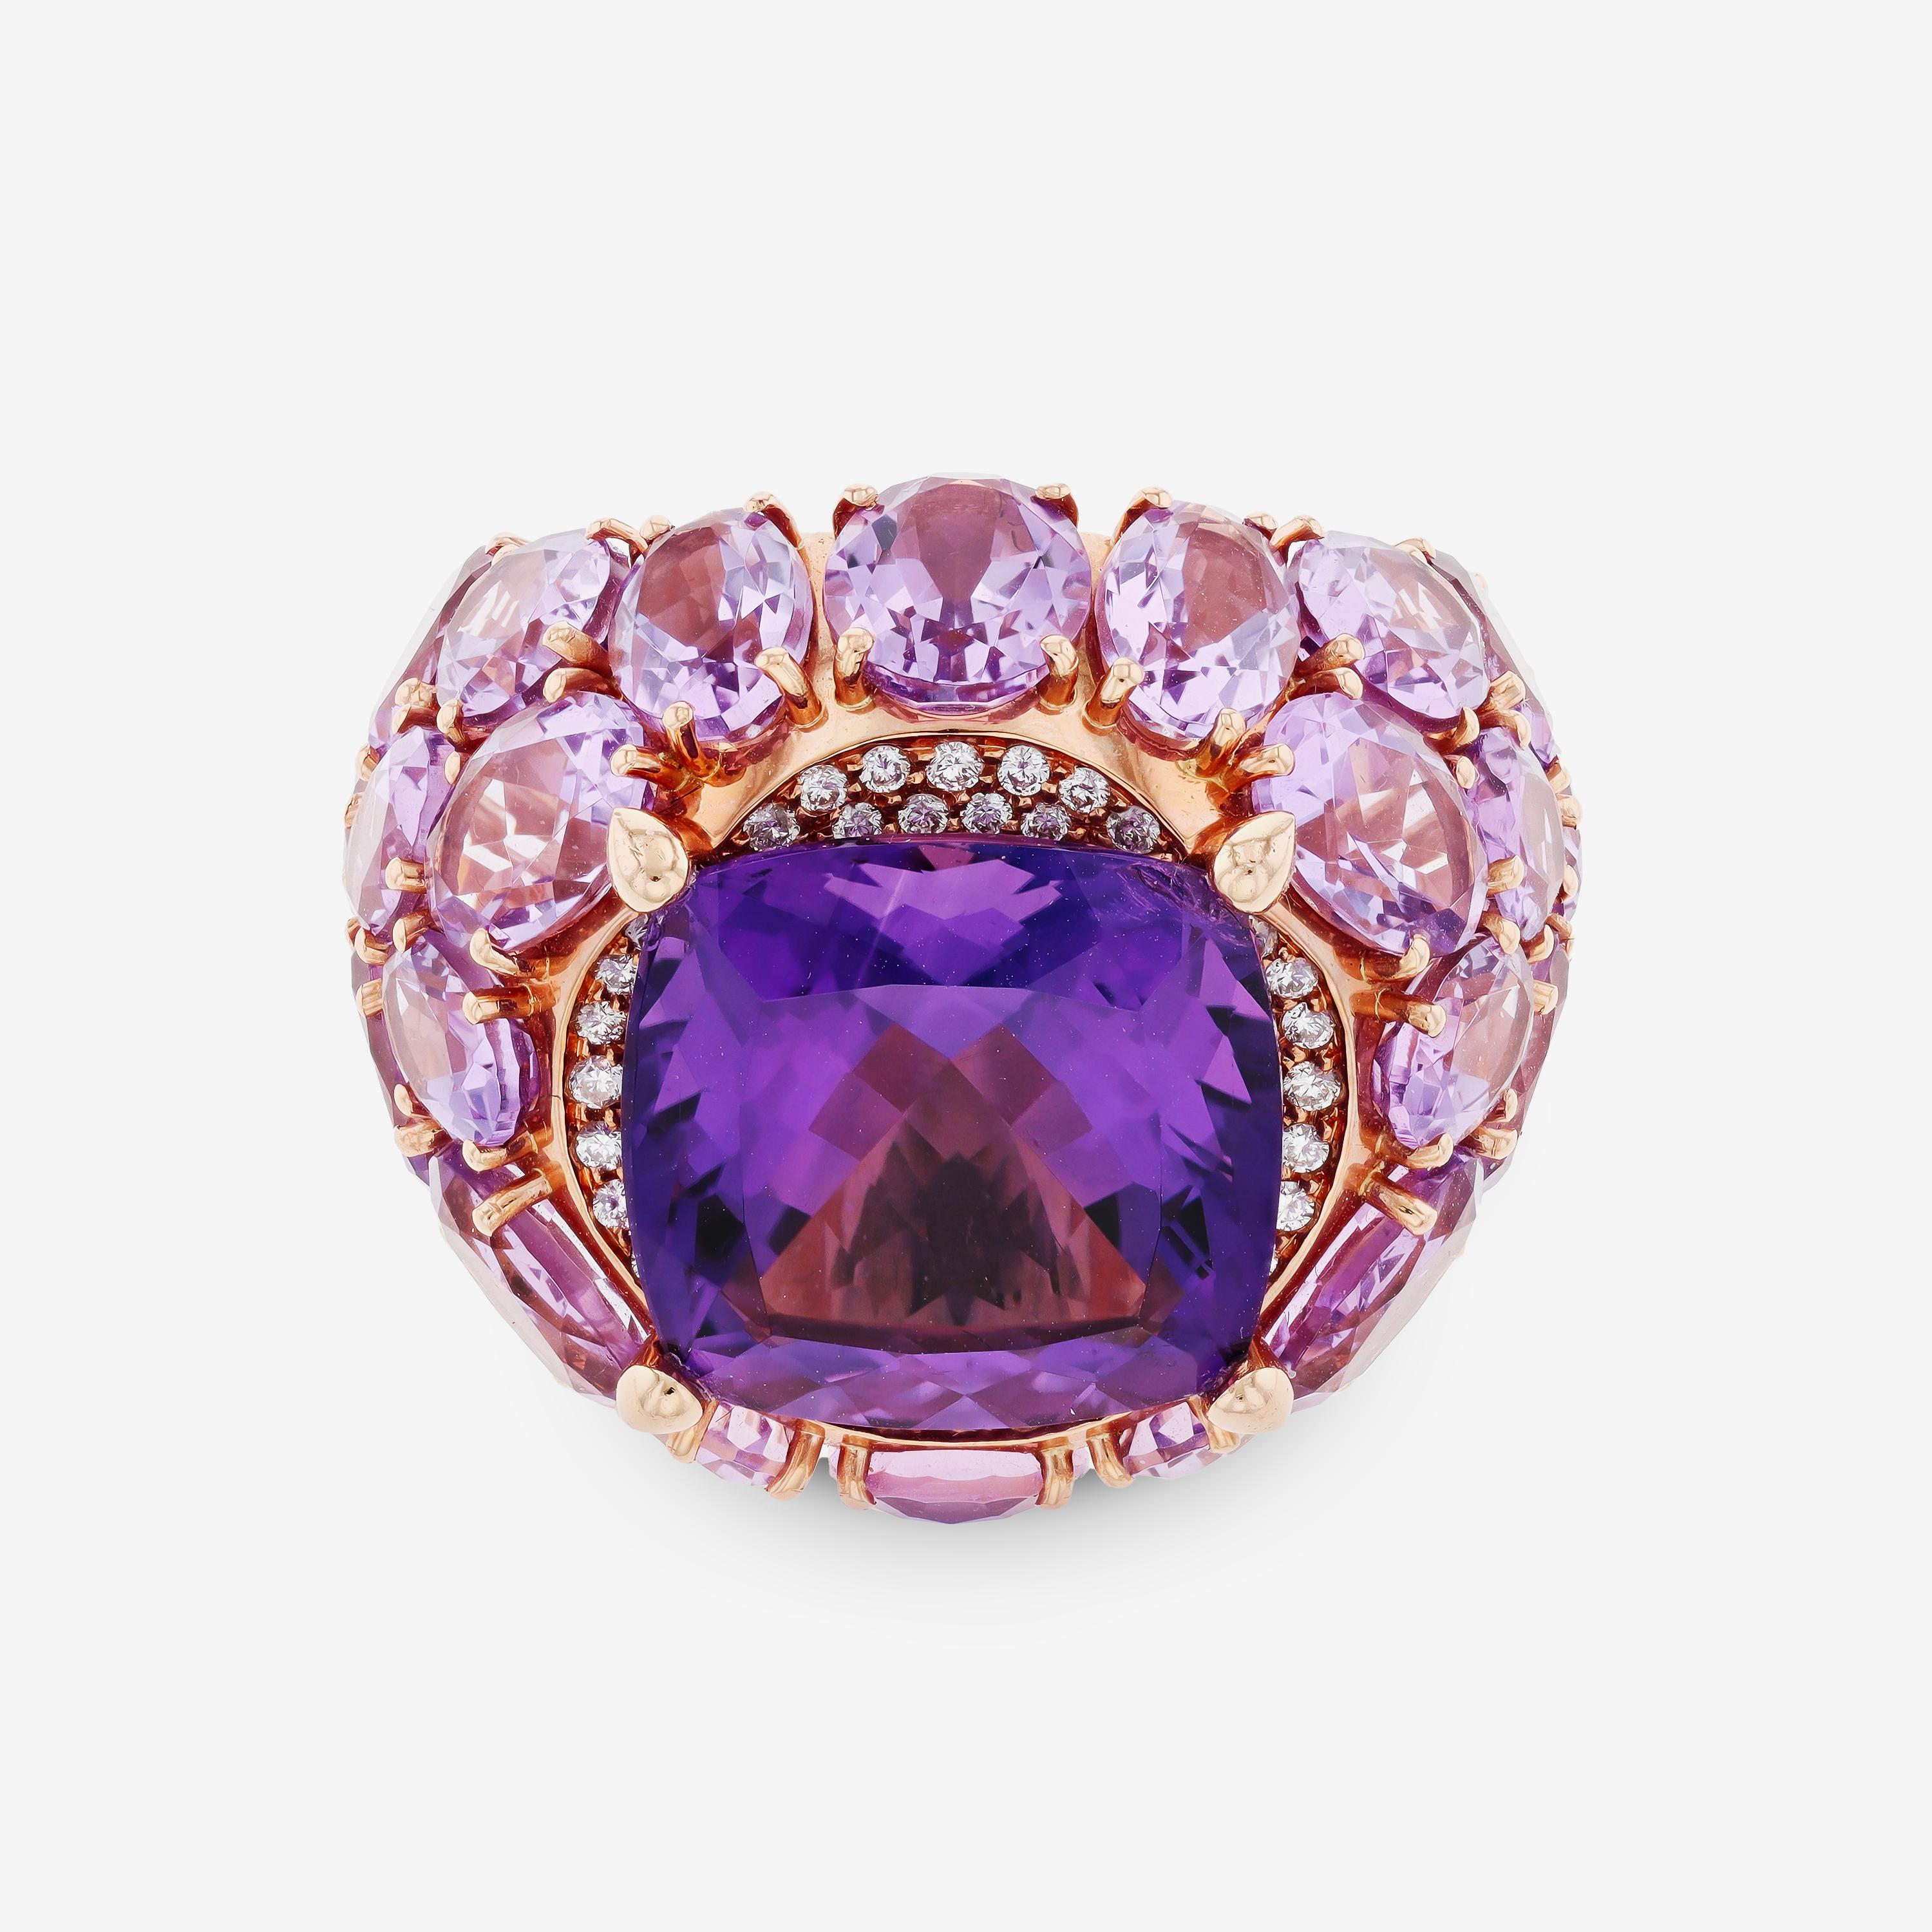 Contemporary Mimi Milano Boutique 18K Rose Gold Amethyst & Diamond Ring sz 7.25 For Sale